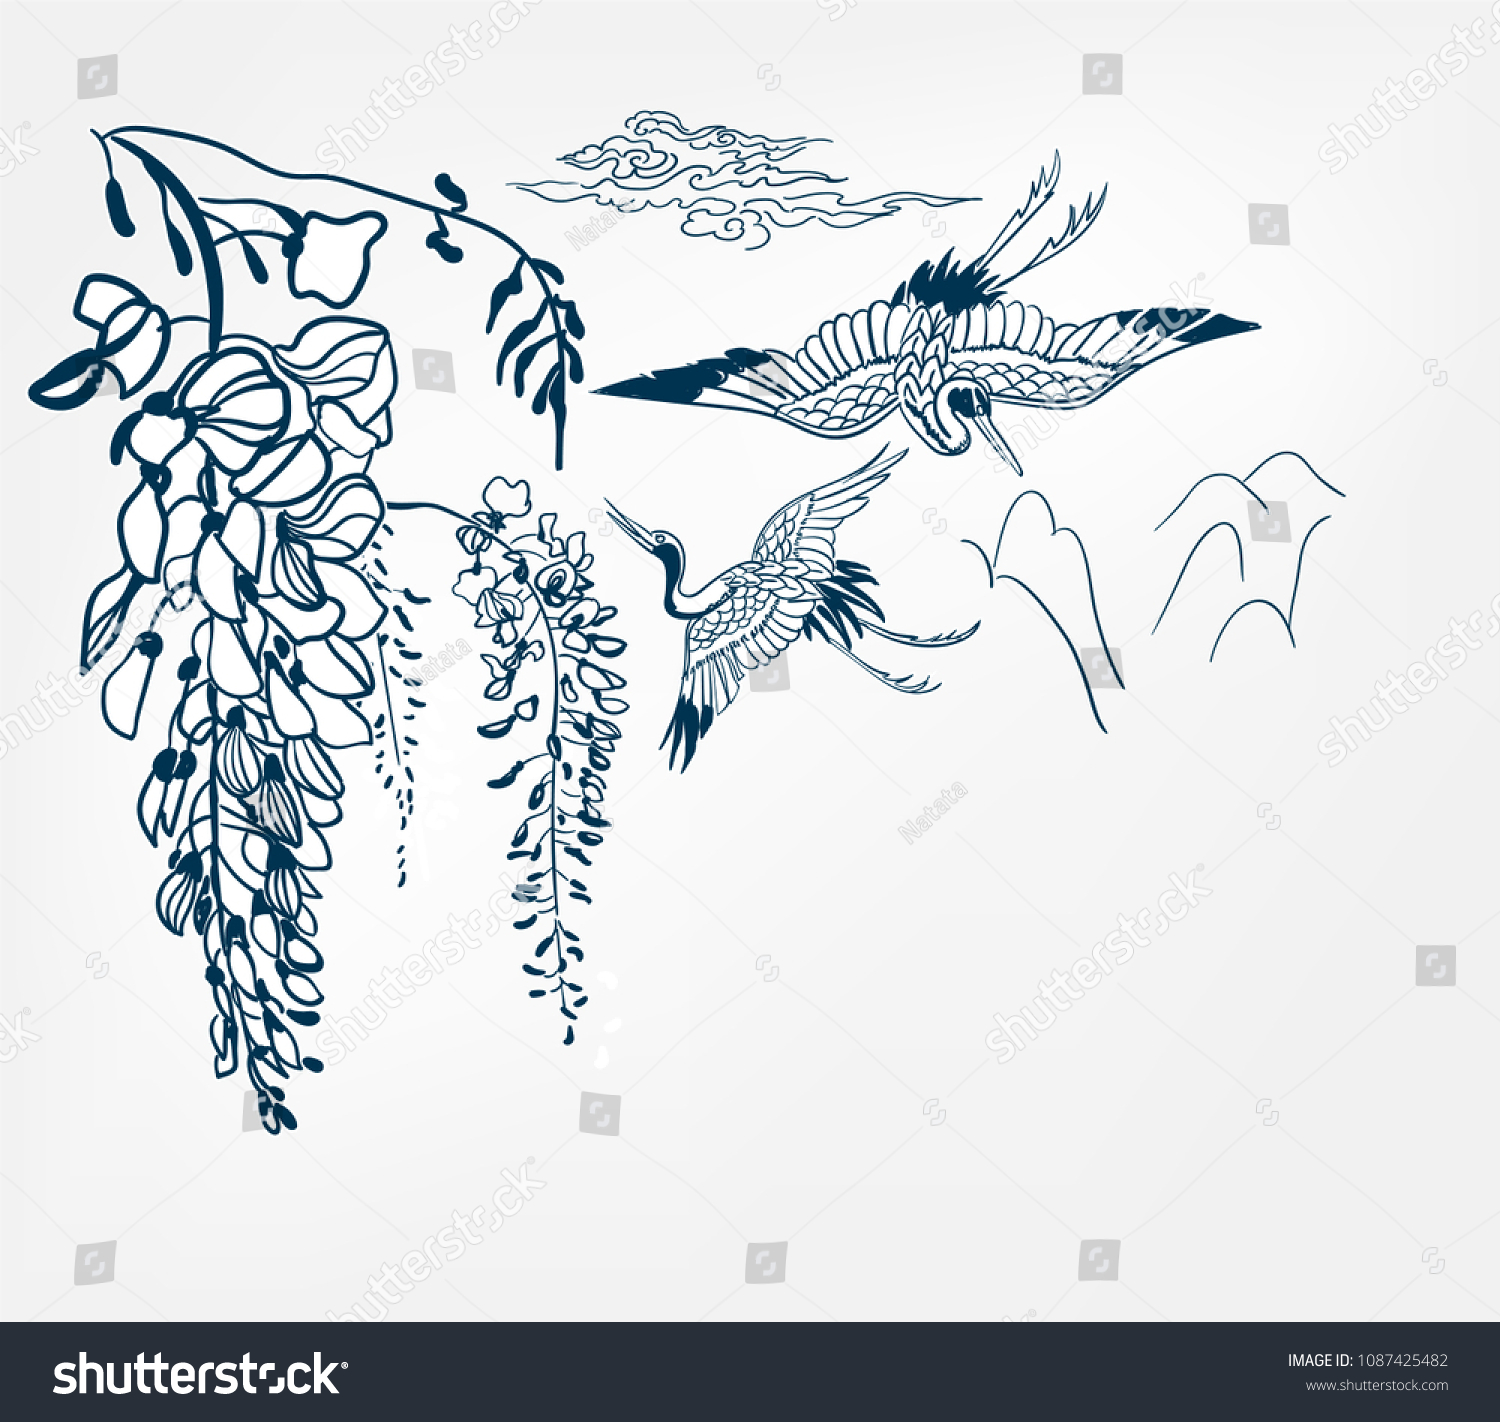 SVG of japanese chinese design sketch ink paint style card background pattern wisteria flower crans mountains clouds svg